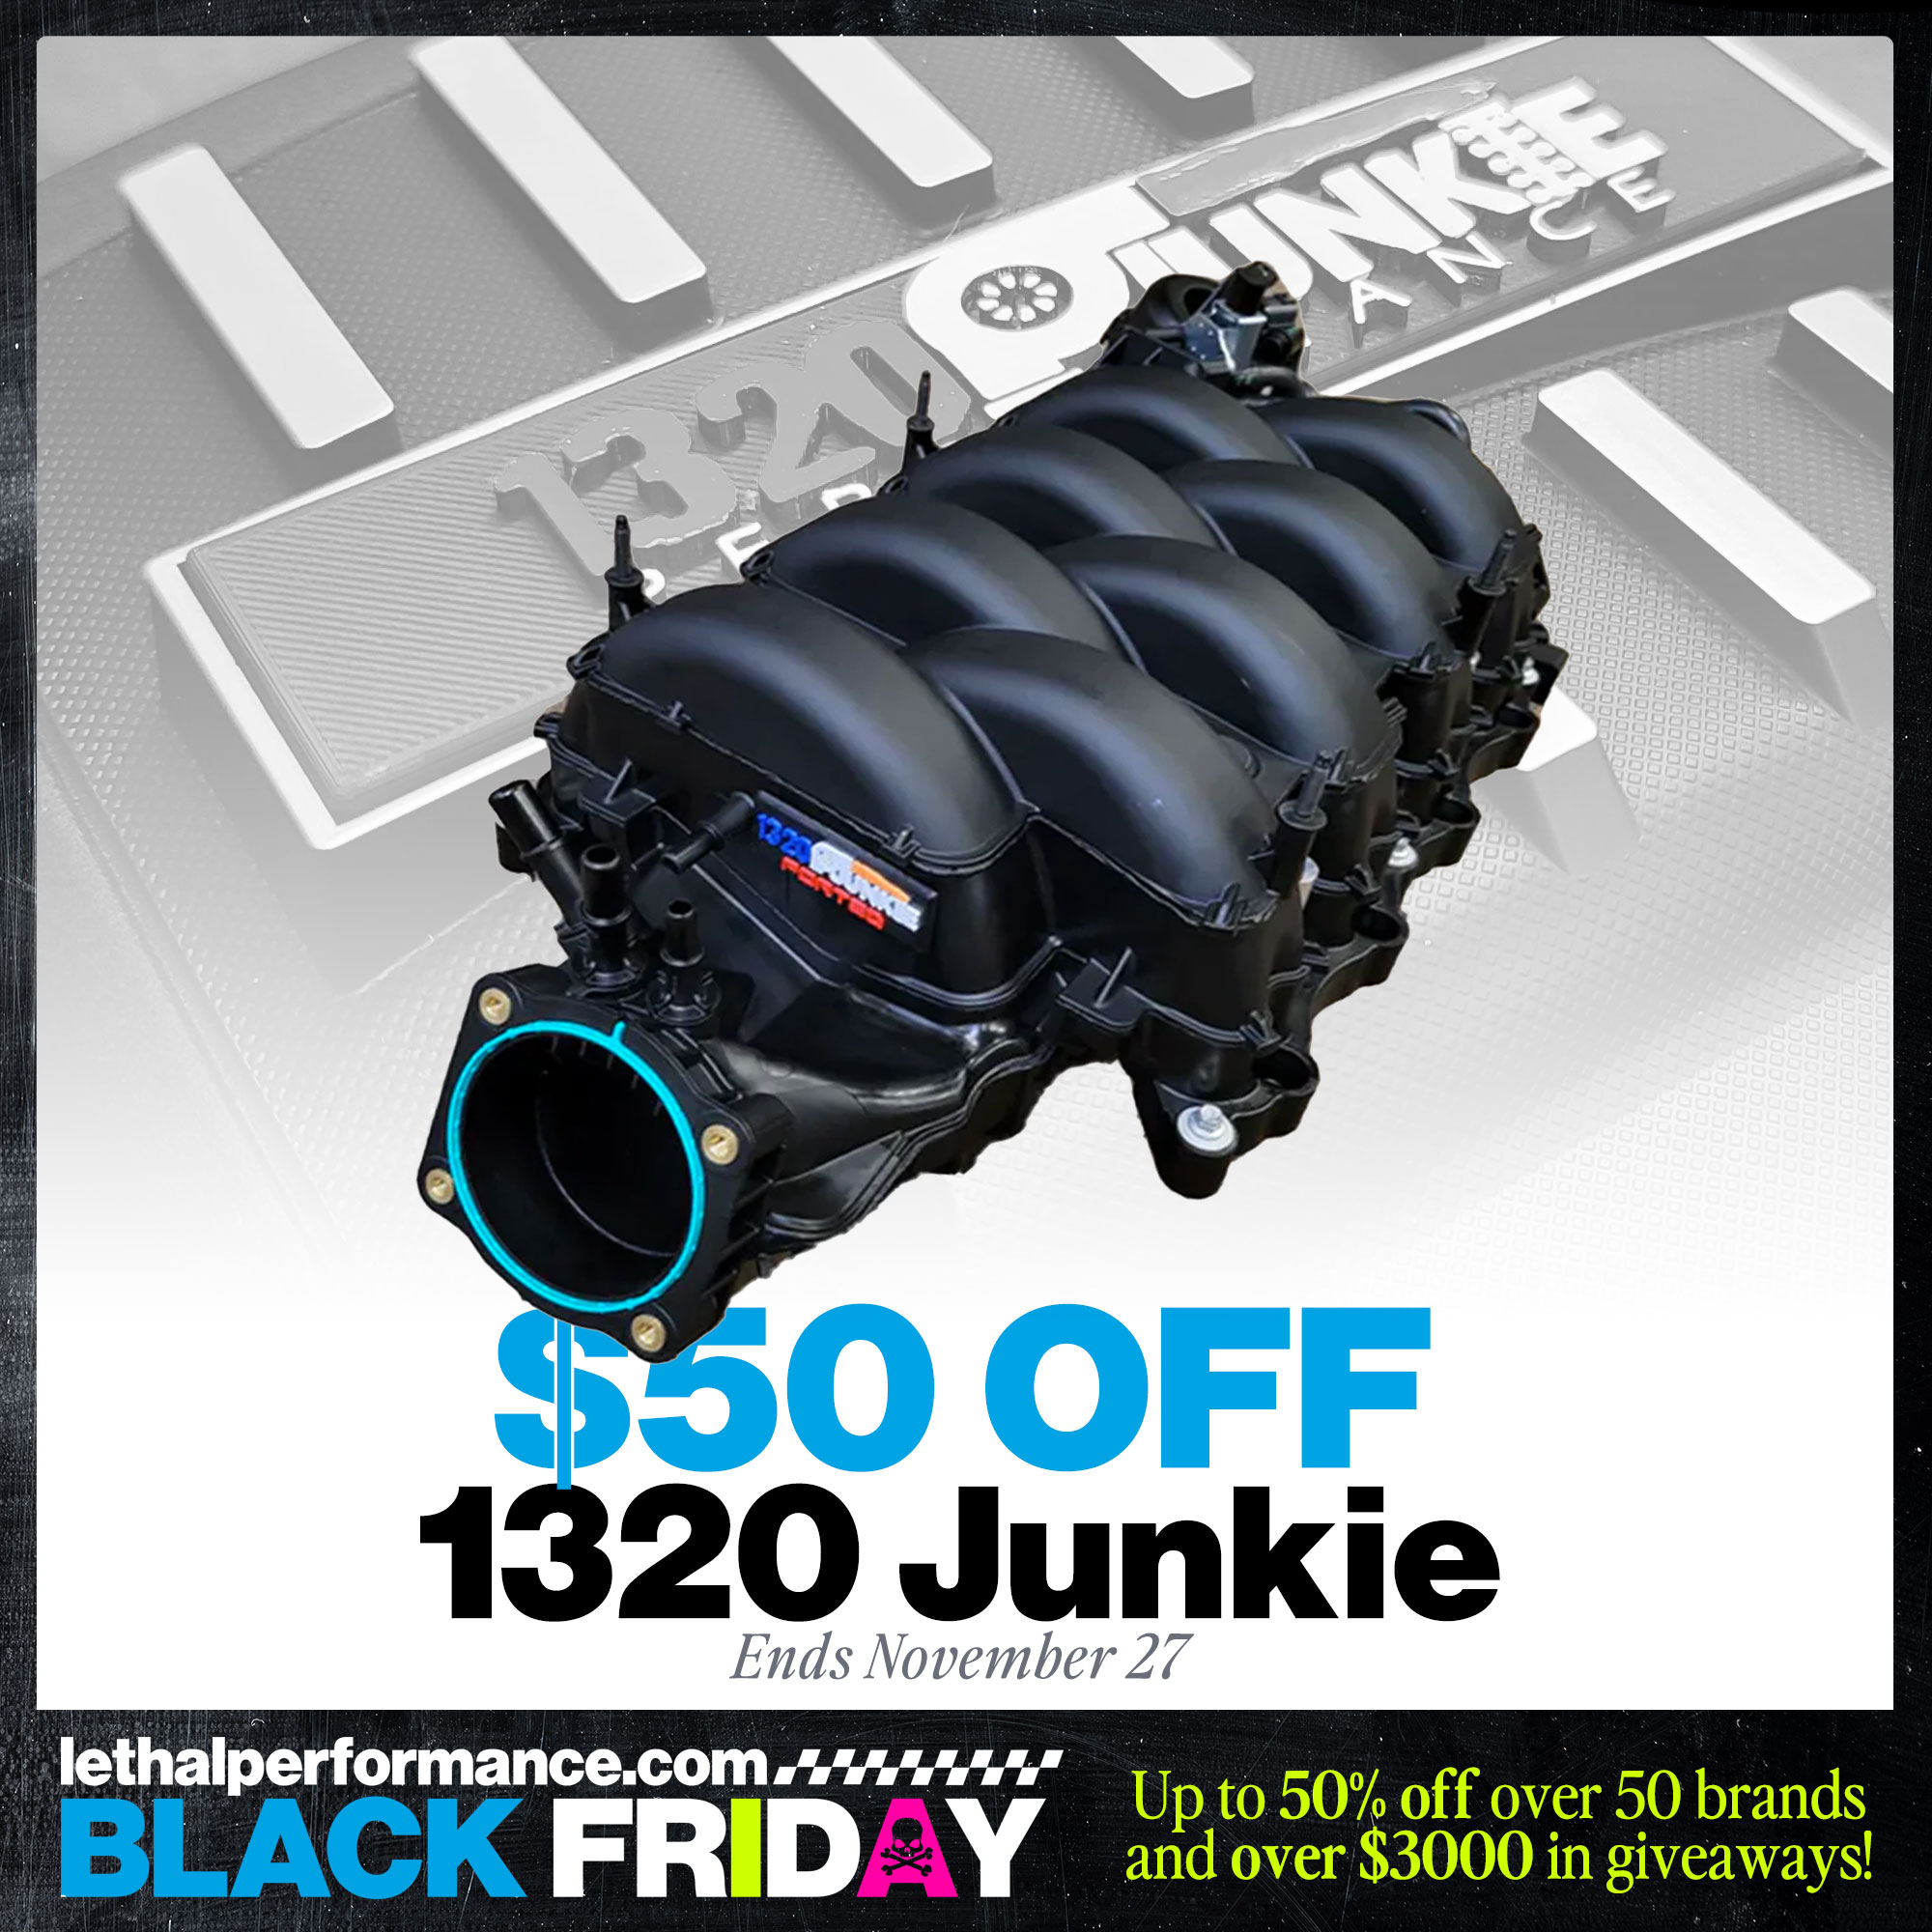 S650 Mustang Black Friday starts NOW! Up to 50% off! 1320Junkie (2)